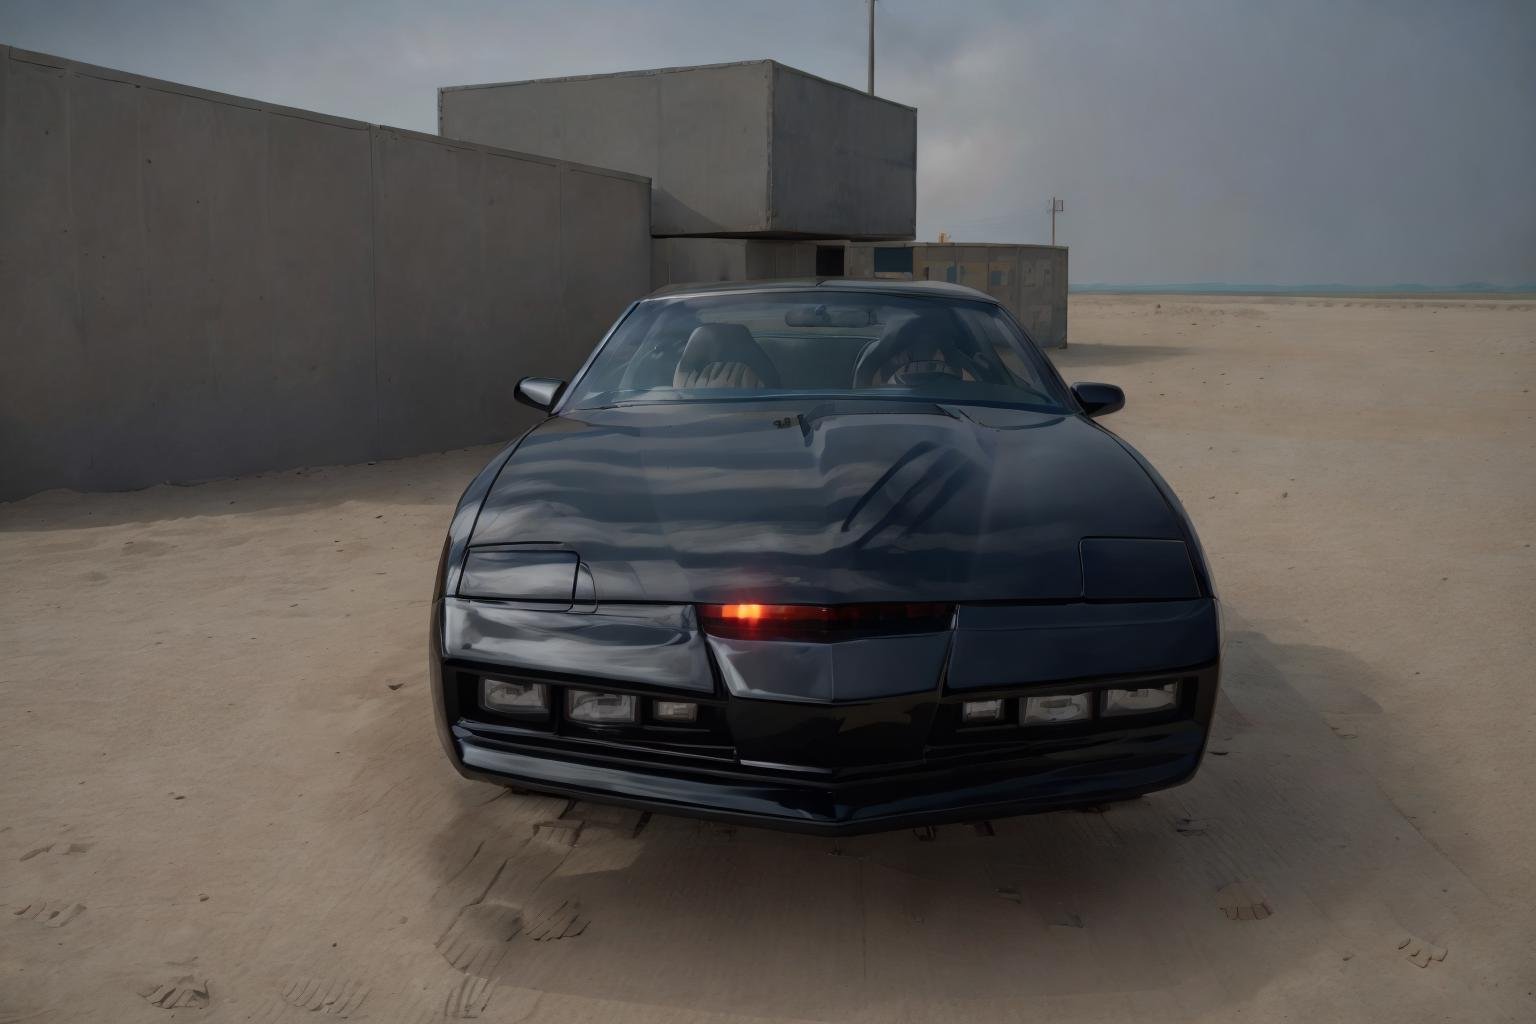 <lora:LoHa_SuperKittV2:0.9> sprkttRecreate K.I.T.T. from Knight Rider with the utmost attention to detail and in the highest possible quality. Generate an 8K-resolution image that features K.I.T.T. against a spectacular and awesome background, designed to capture the essence of the iconic series. Utilize atmospheric volumetric lighting to emphasize the car's legendary design and create a scene that pays homage to the dynamic visuals of Knight Rider. Strive for the highest quality and detail, ensuring that the final shot is a masterpiece that truly does justice to the legendary vehicle and the spirit of the series, Over-the-shoulder shot 